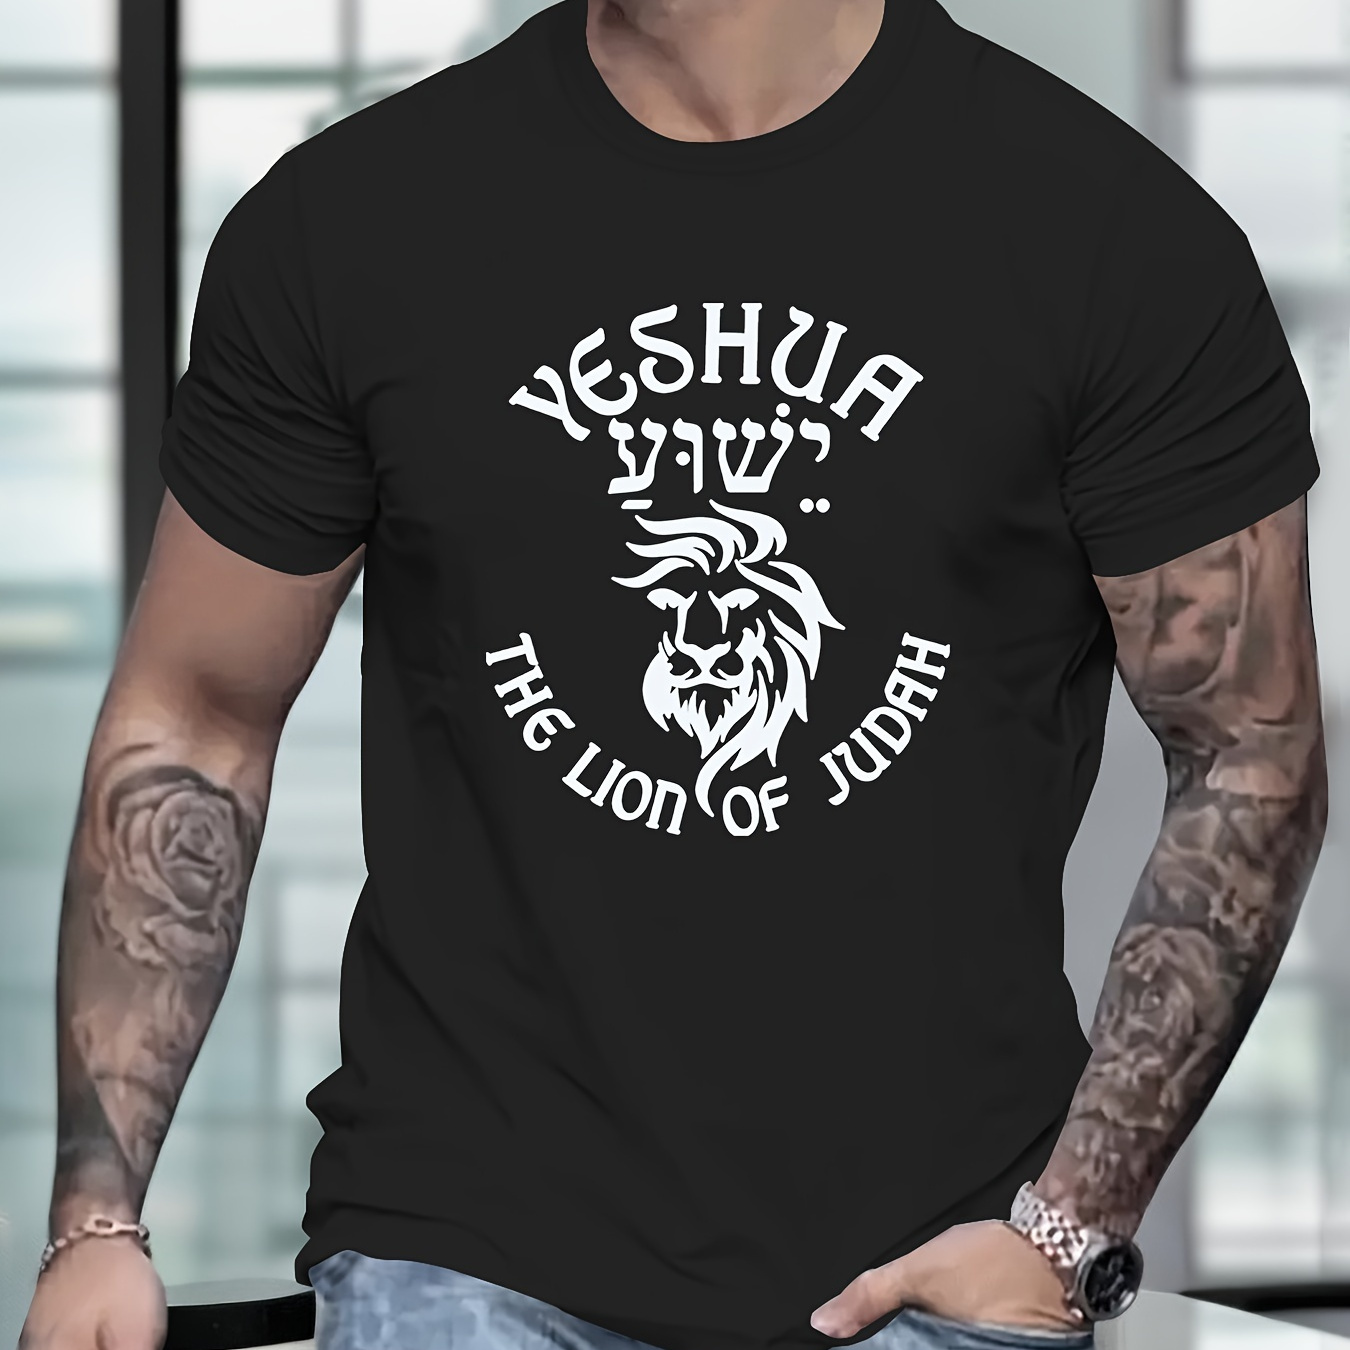 

Men's Classic Black T-shirt With "yeshua The Lion Of Judah" Print, Casual Short-sleeve Graphic Tee, Fashionable Streetwear Top